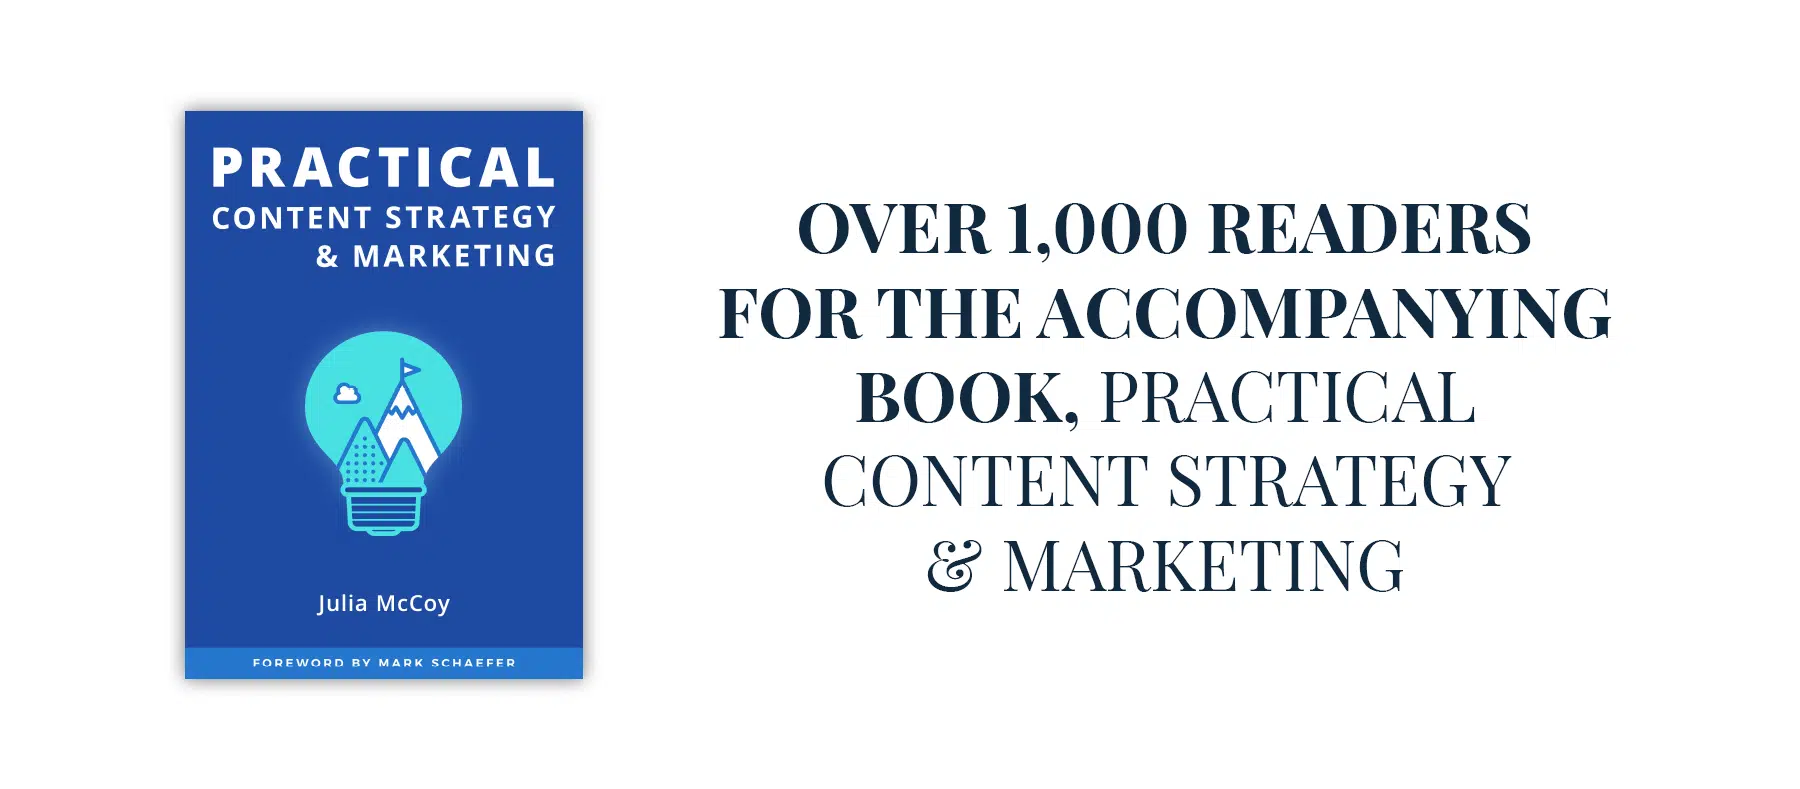 content strategy & marketing course sales page book image